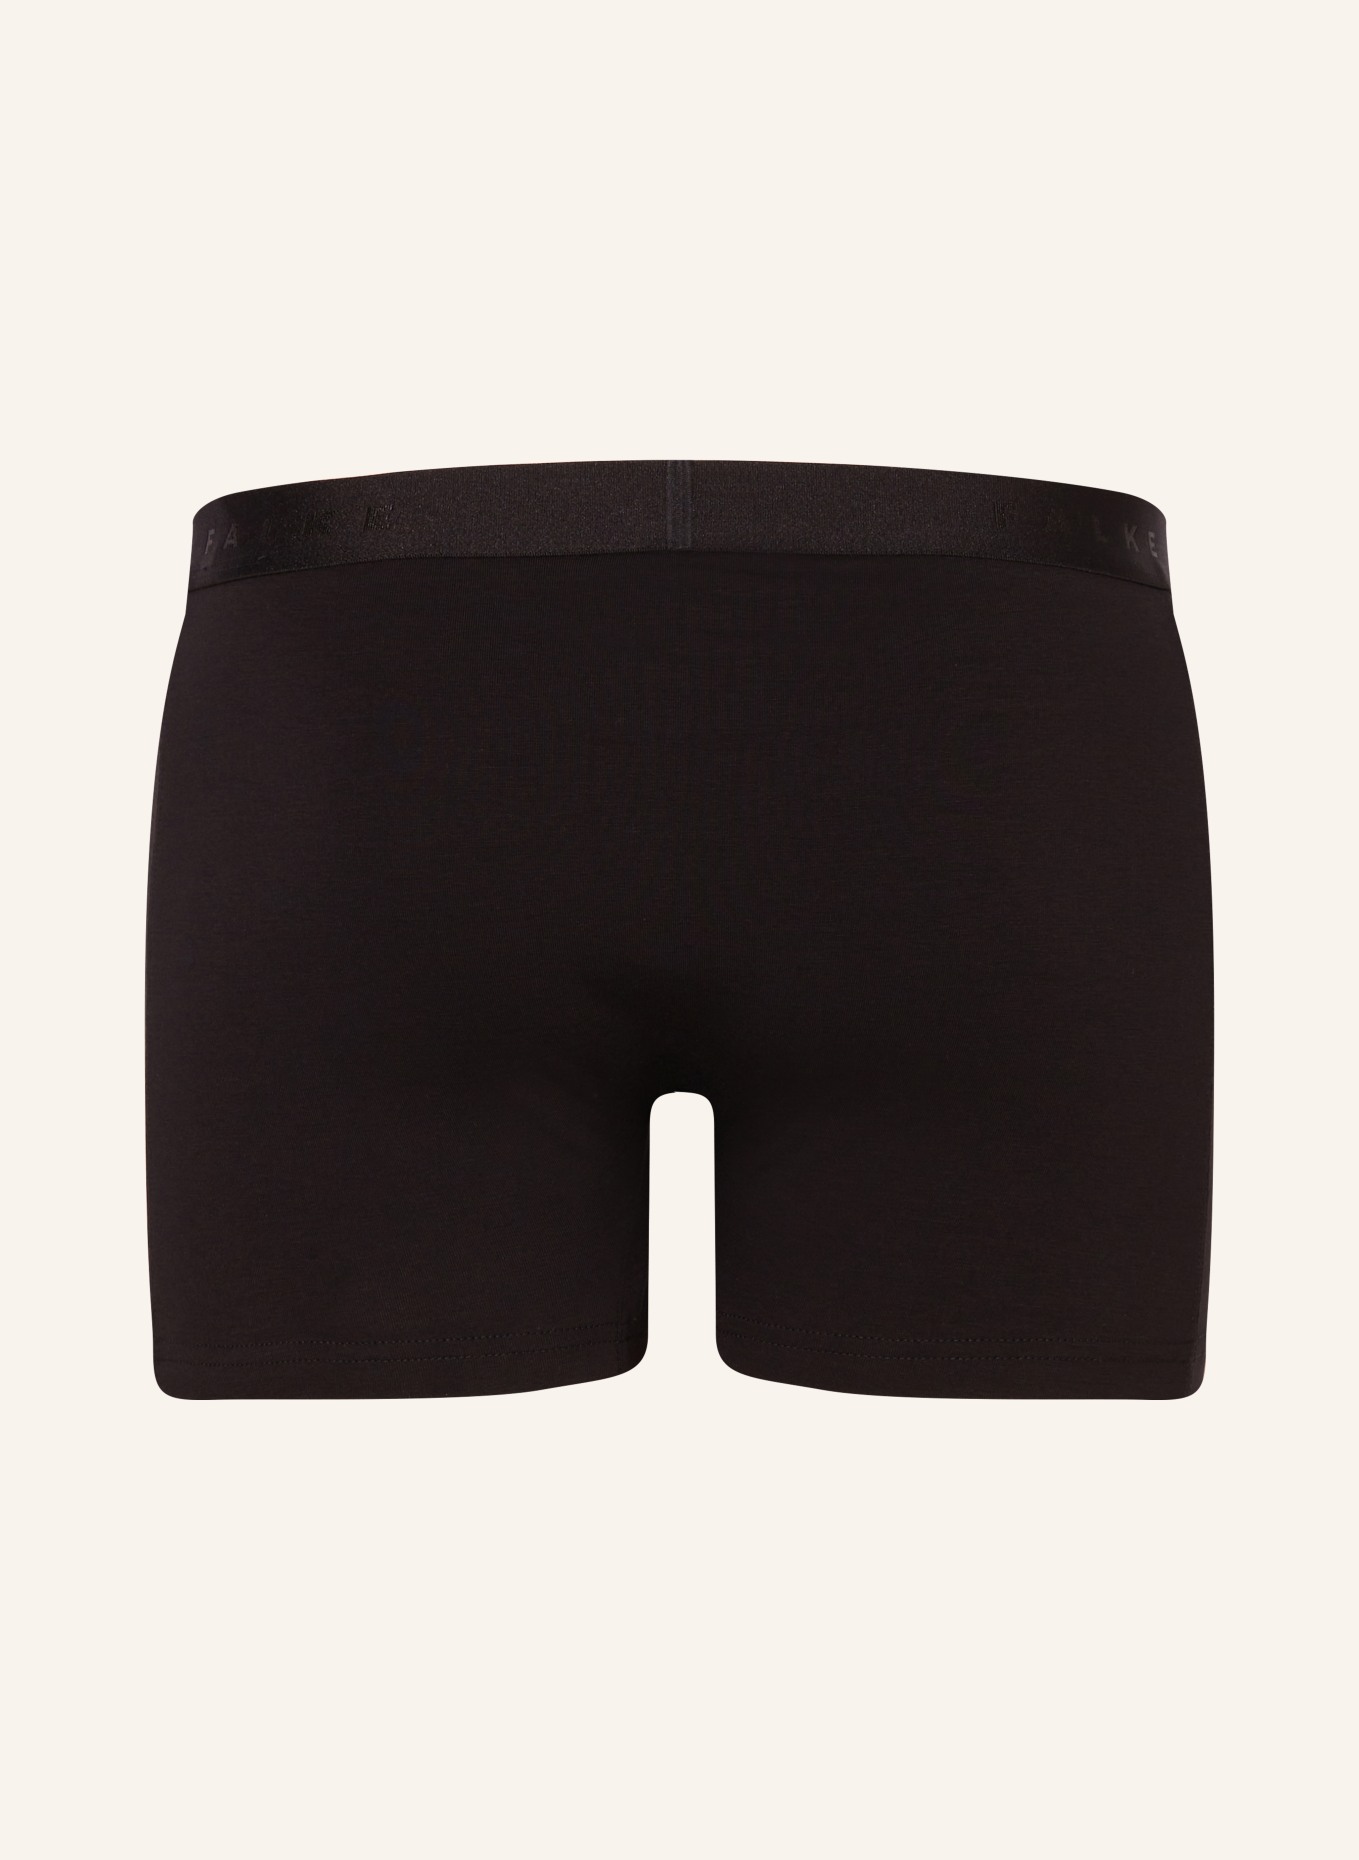 The new underwear collection Daily ClimaWool